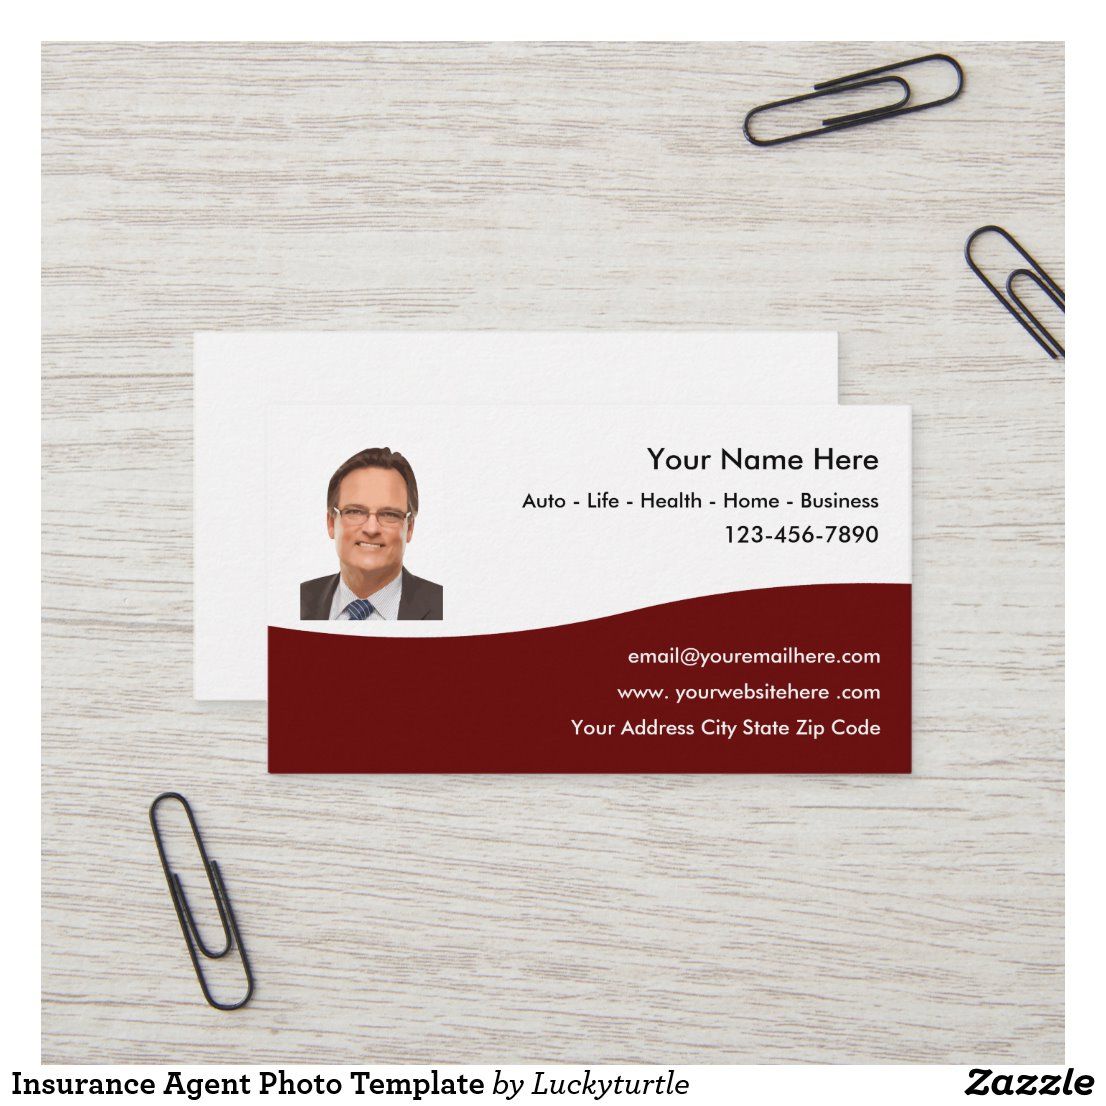 business cards for insurance agents 2